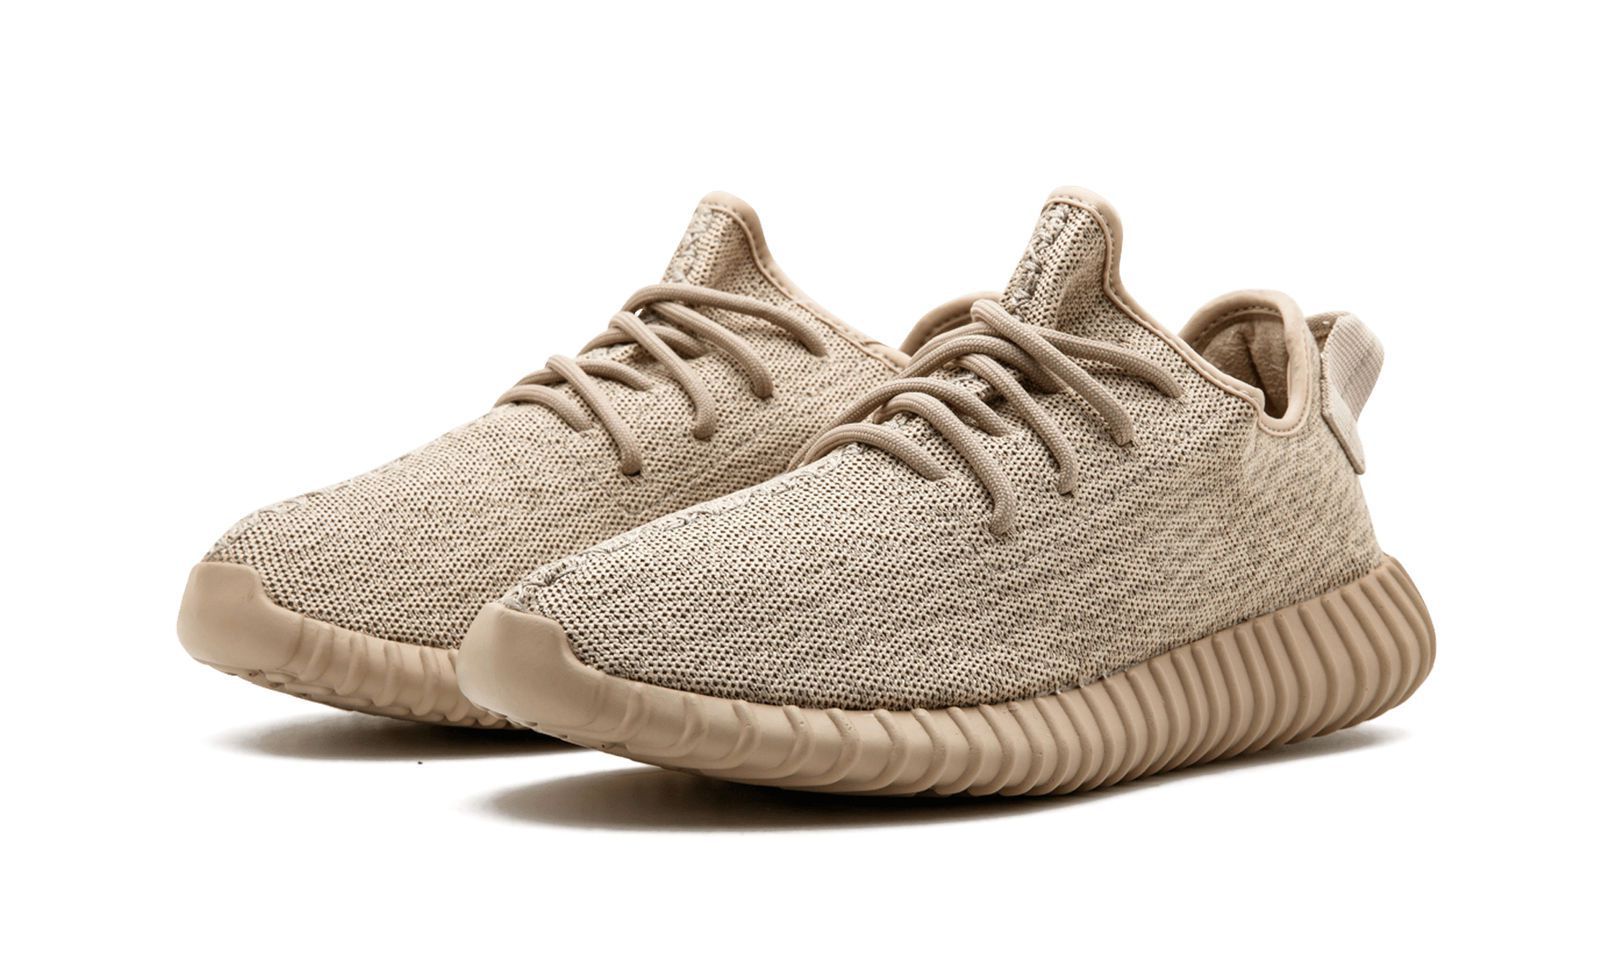 Adidas Yeezy Boost 350 Oxford Tan Running Shoes - Buy Adidas Yeezy Boost 350 Oxford Tan Running 